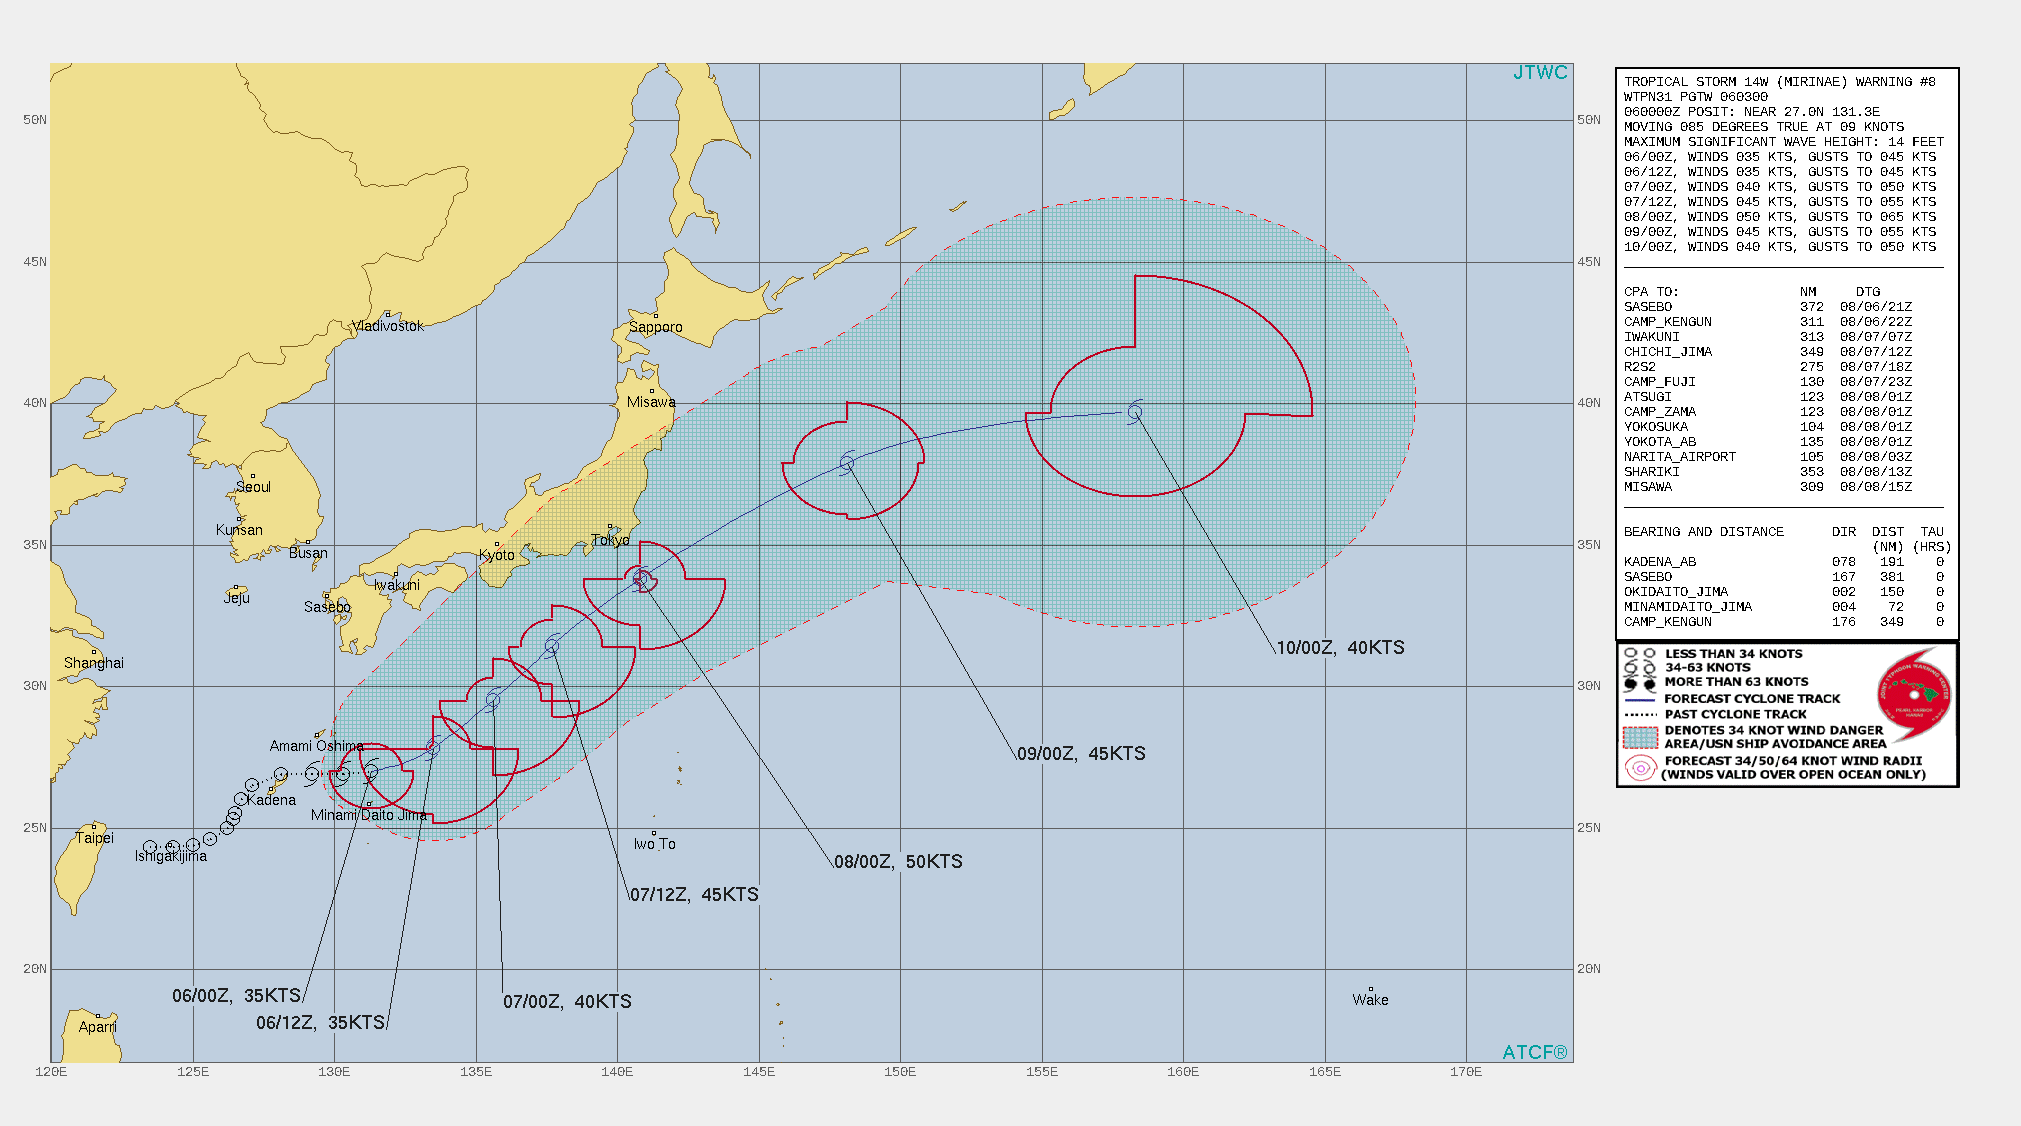 TS 14W(MIRINAE). WARNING 8 ISSUED AT 06/03UTC.THERE ARE NO SIGNIFICANT CHANGES TO THE FORECAST FROM THE PREVIOUS WARNING.  FORECAST DISCUSSION: TS 14W IS CURRENTLY EMBEDDED WITHIN A REVERSE ORIENTED MONSOON TROUGH, ALONG THE NORTHERN EDGE OF THE STRONG BAND OF MONSOONAL WEST-SOUTHWESTERLY FLOW. TS 14W WILL TRACK EAST-NORTHEASTERLY ALONG THIS FLOW THROUGH 36H AND THEN TURN NORTHEASTERLY THROUGH 72H AS IT TRACKS UNDER A STRONG SUBTROPICAL RIDGE POSITIONED SOUTHEAST OF JAPAN. NEAR 72H, THE SYSTEM IS EXPECTED TO BEGIN EXTRA-TROPICAL TRANSITION (ETT) AS IT BEGINS INTERACTING WITH THE BAROCLINIC ZONE TO THE EAST OF NORTHERN HONSHU. THE SYSTEM IS EXPECTED TO COMPLETE ETT AS A GALE FORCE LOW NO LATER THAN 96H.